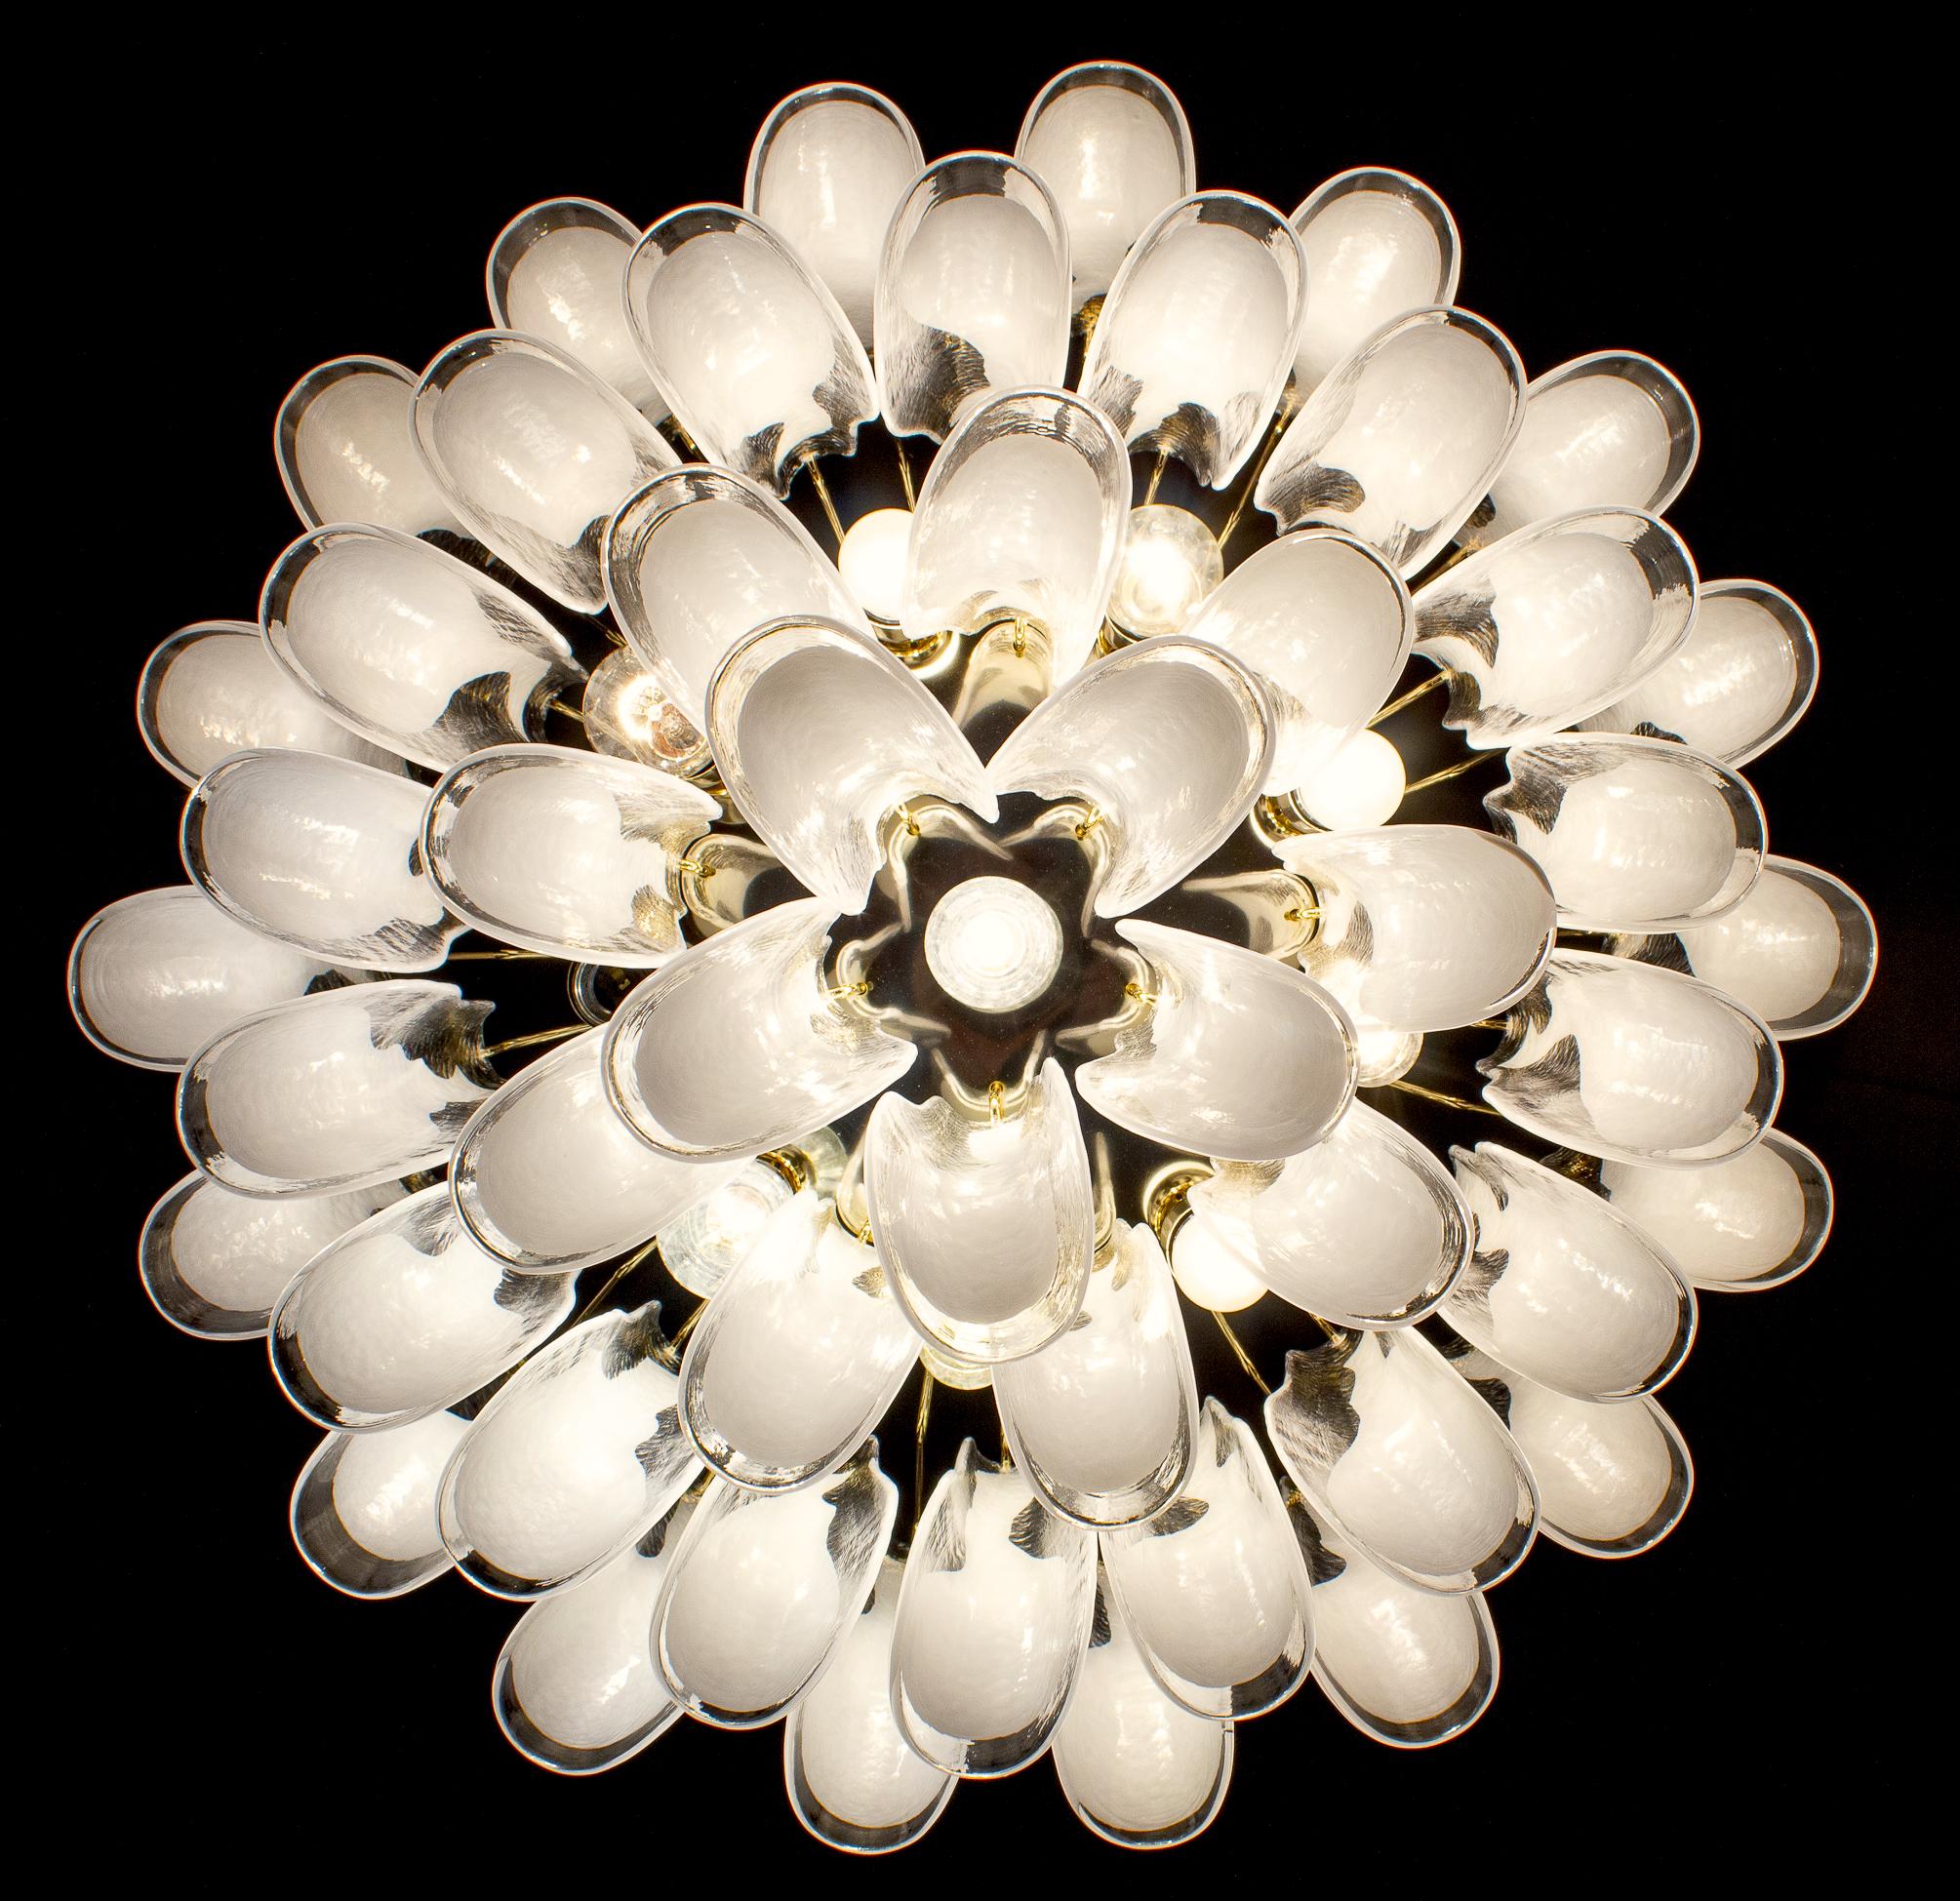 Striking Pair of Large Murano Glass Chandelier or Ceiling Light For Sale 4